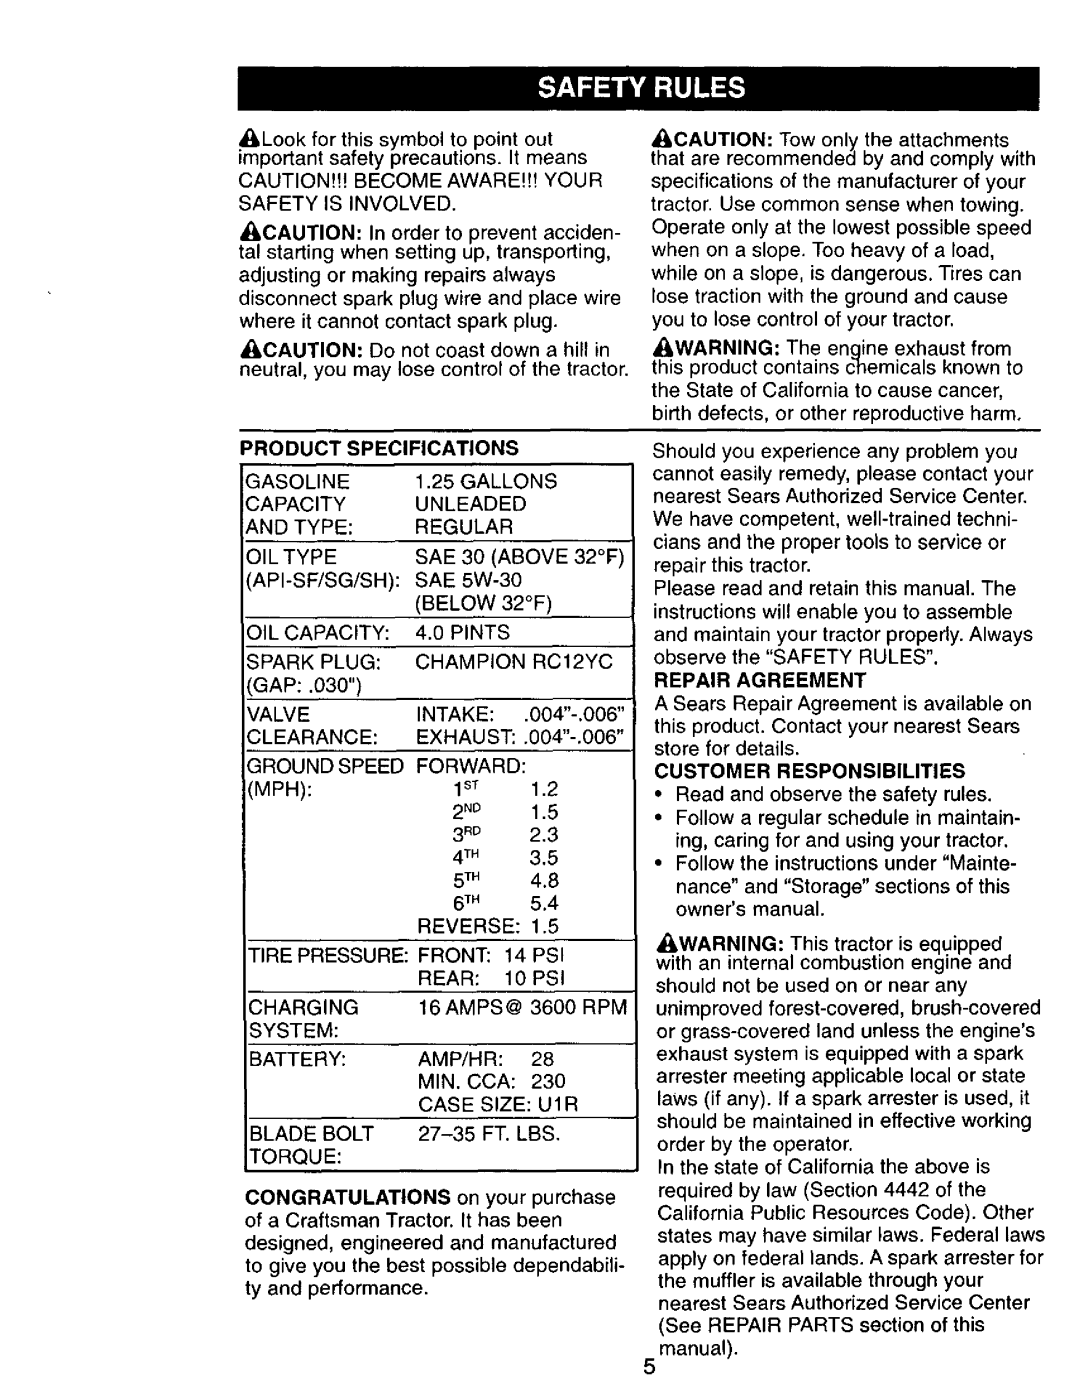 Craftsman 917.270751 owner manual Product Specifications, Customer Responsibilities 